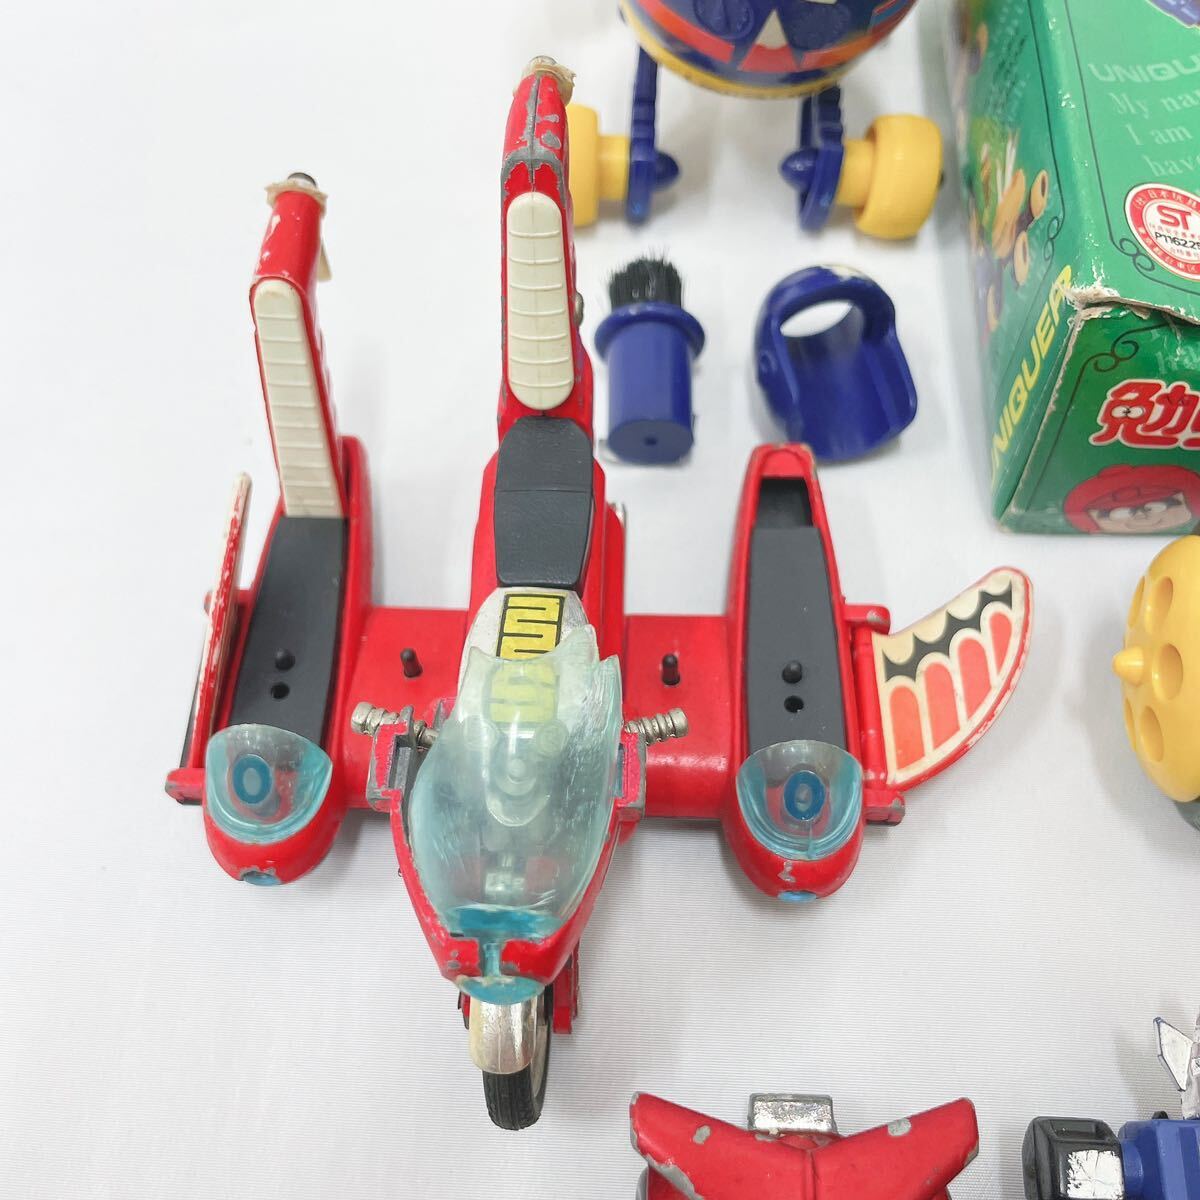  old Takara Microman ak beige B/ old Aoshima red Panther / red kozmik other plastic model toy together that time thing retro R.03290